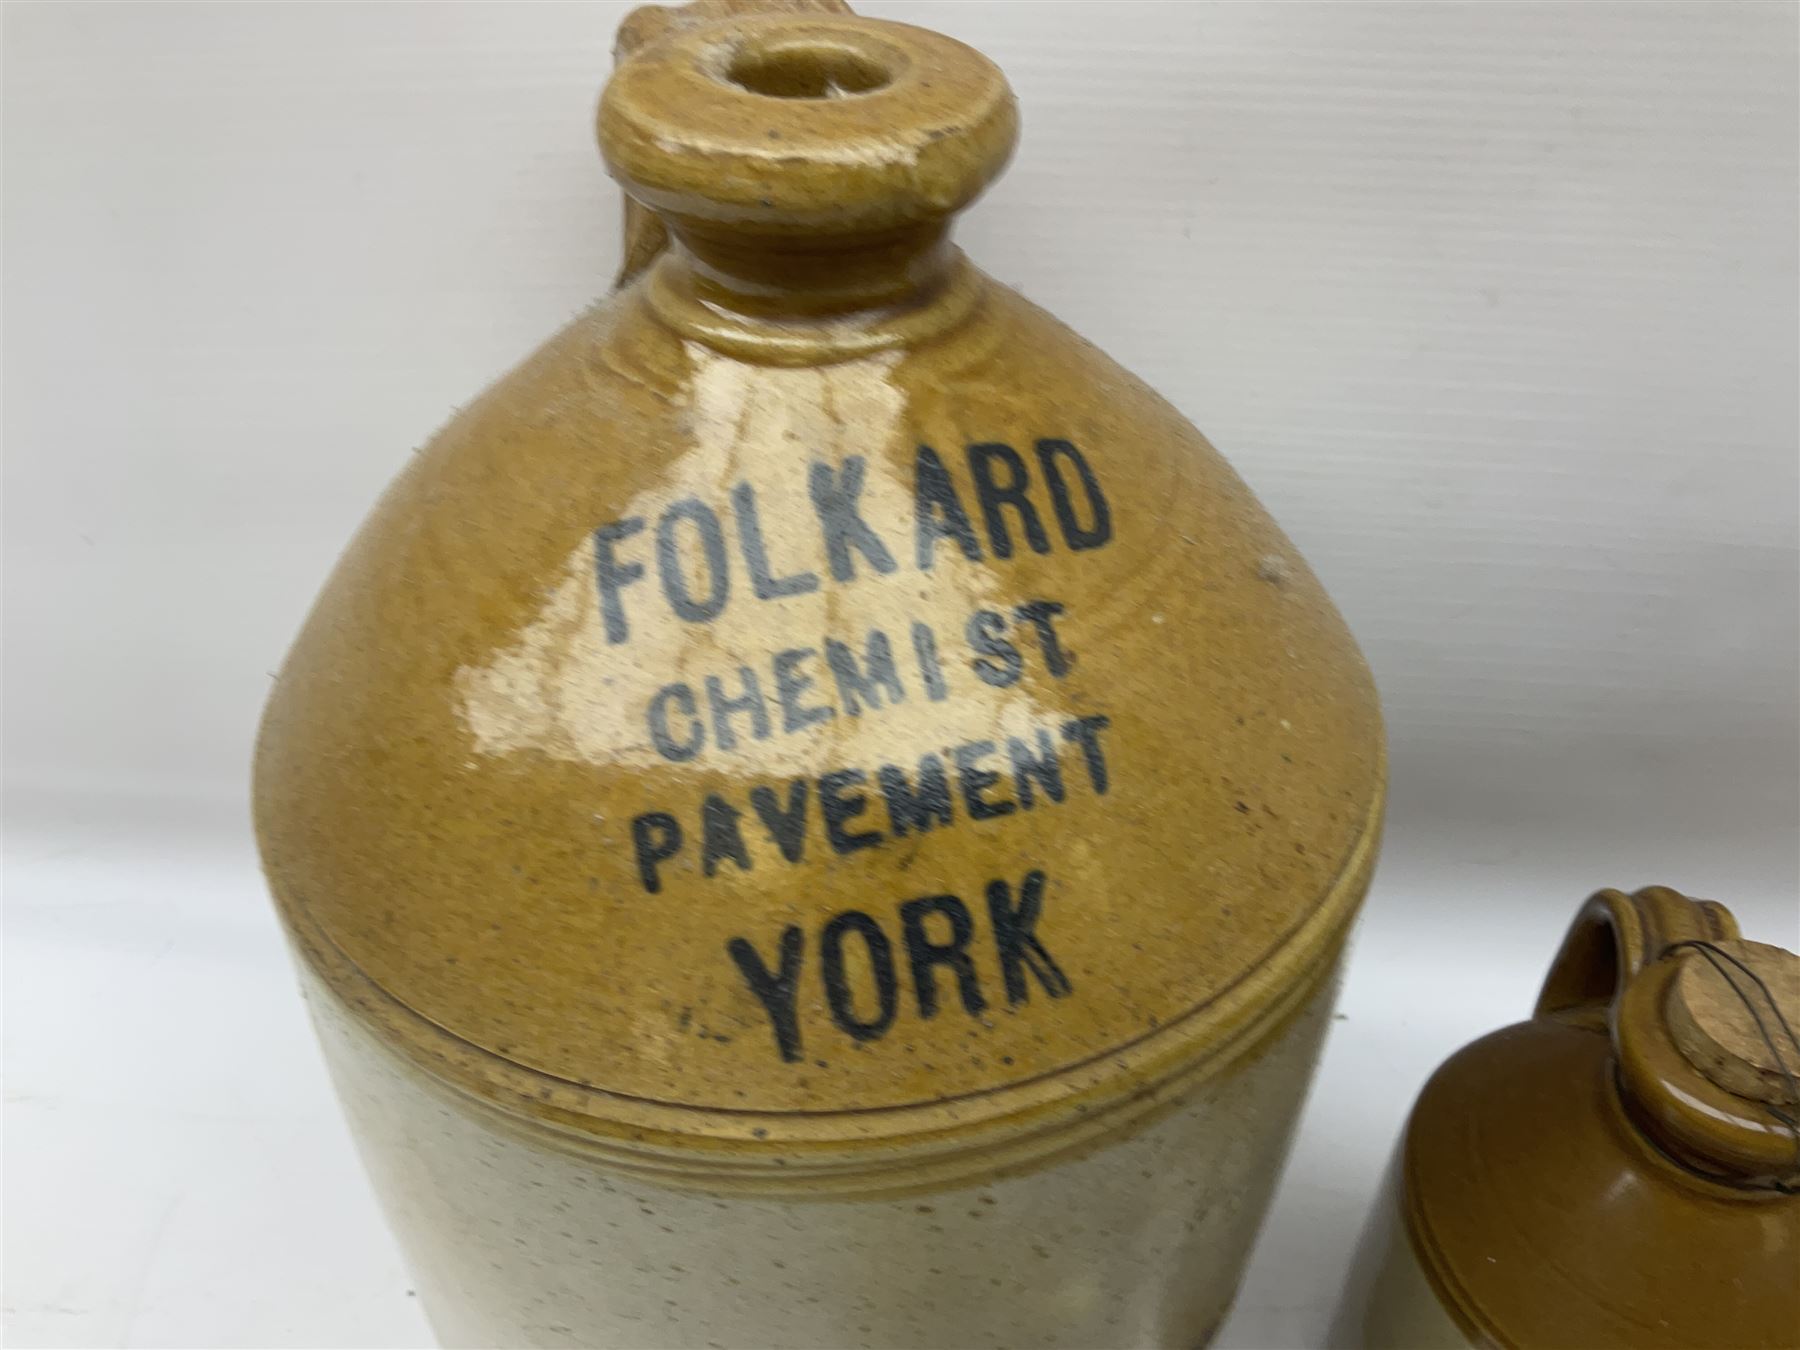 Large stoneware two tone flagon with black lettering Folkard Chemist Pavement York - Image 2 of 9